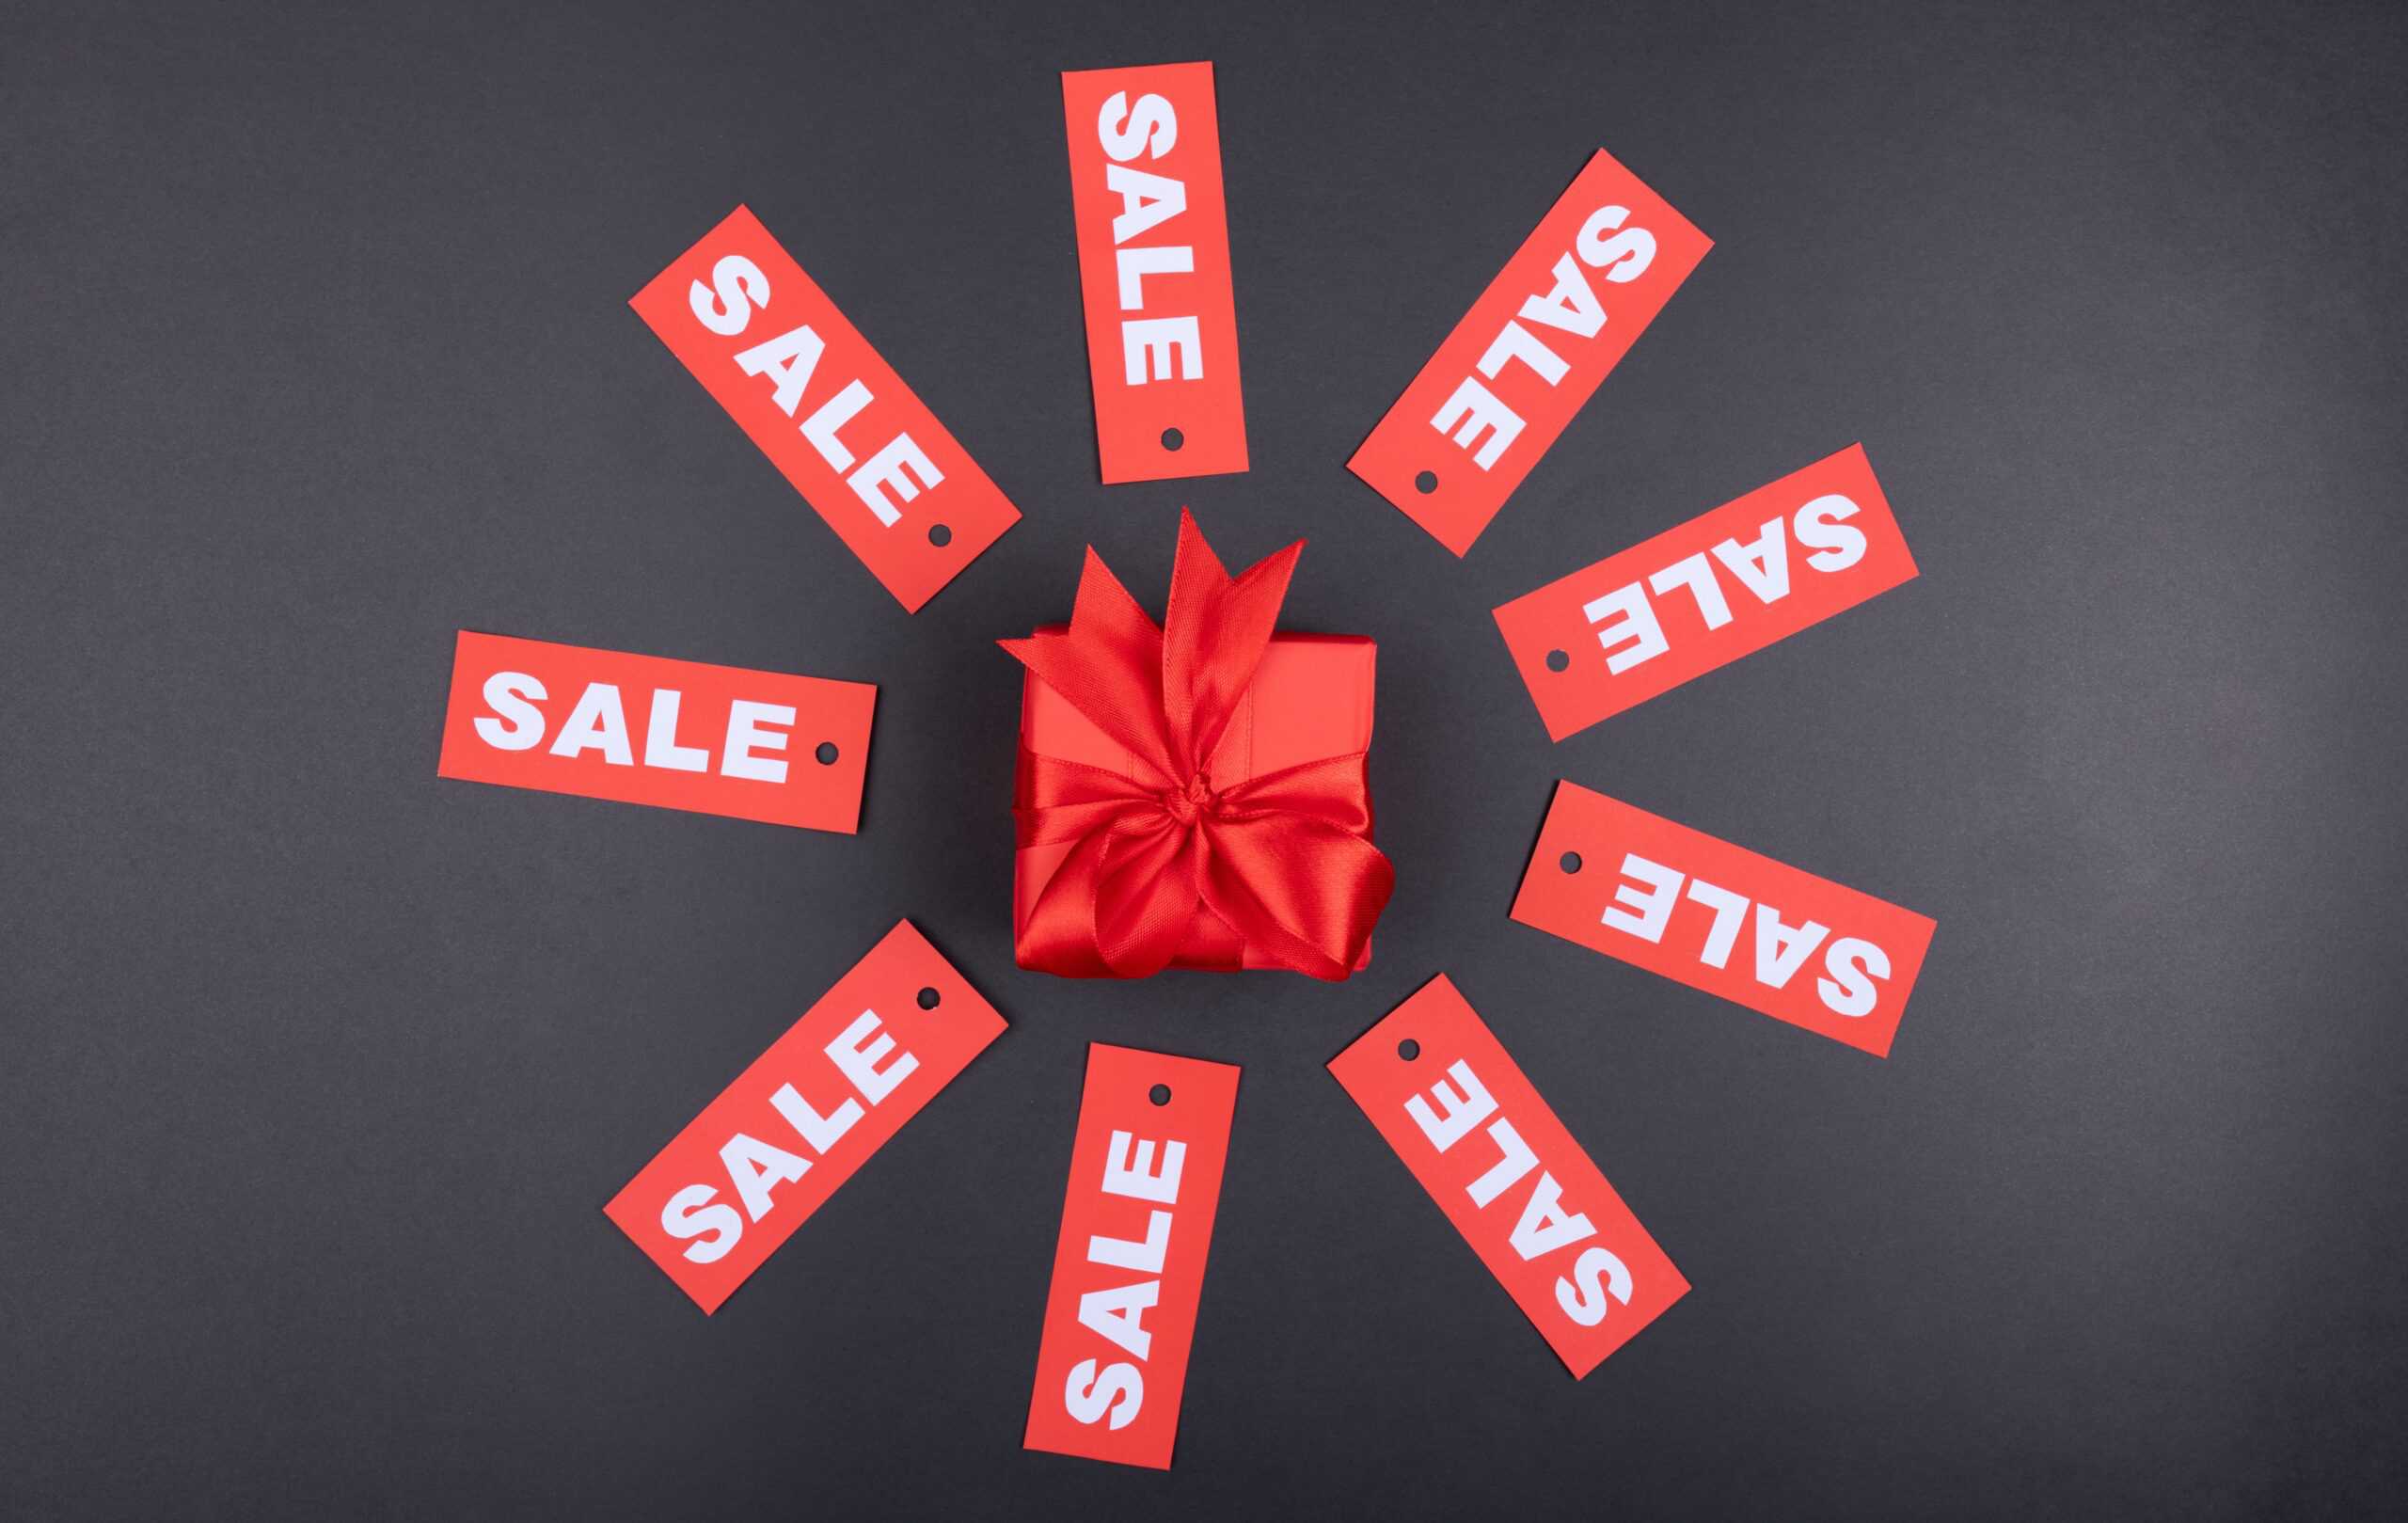 Wrapped present with red box and tags labels sale surrounding the present